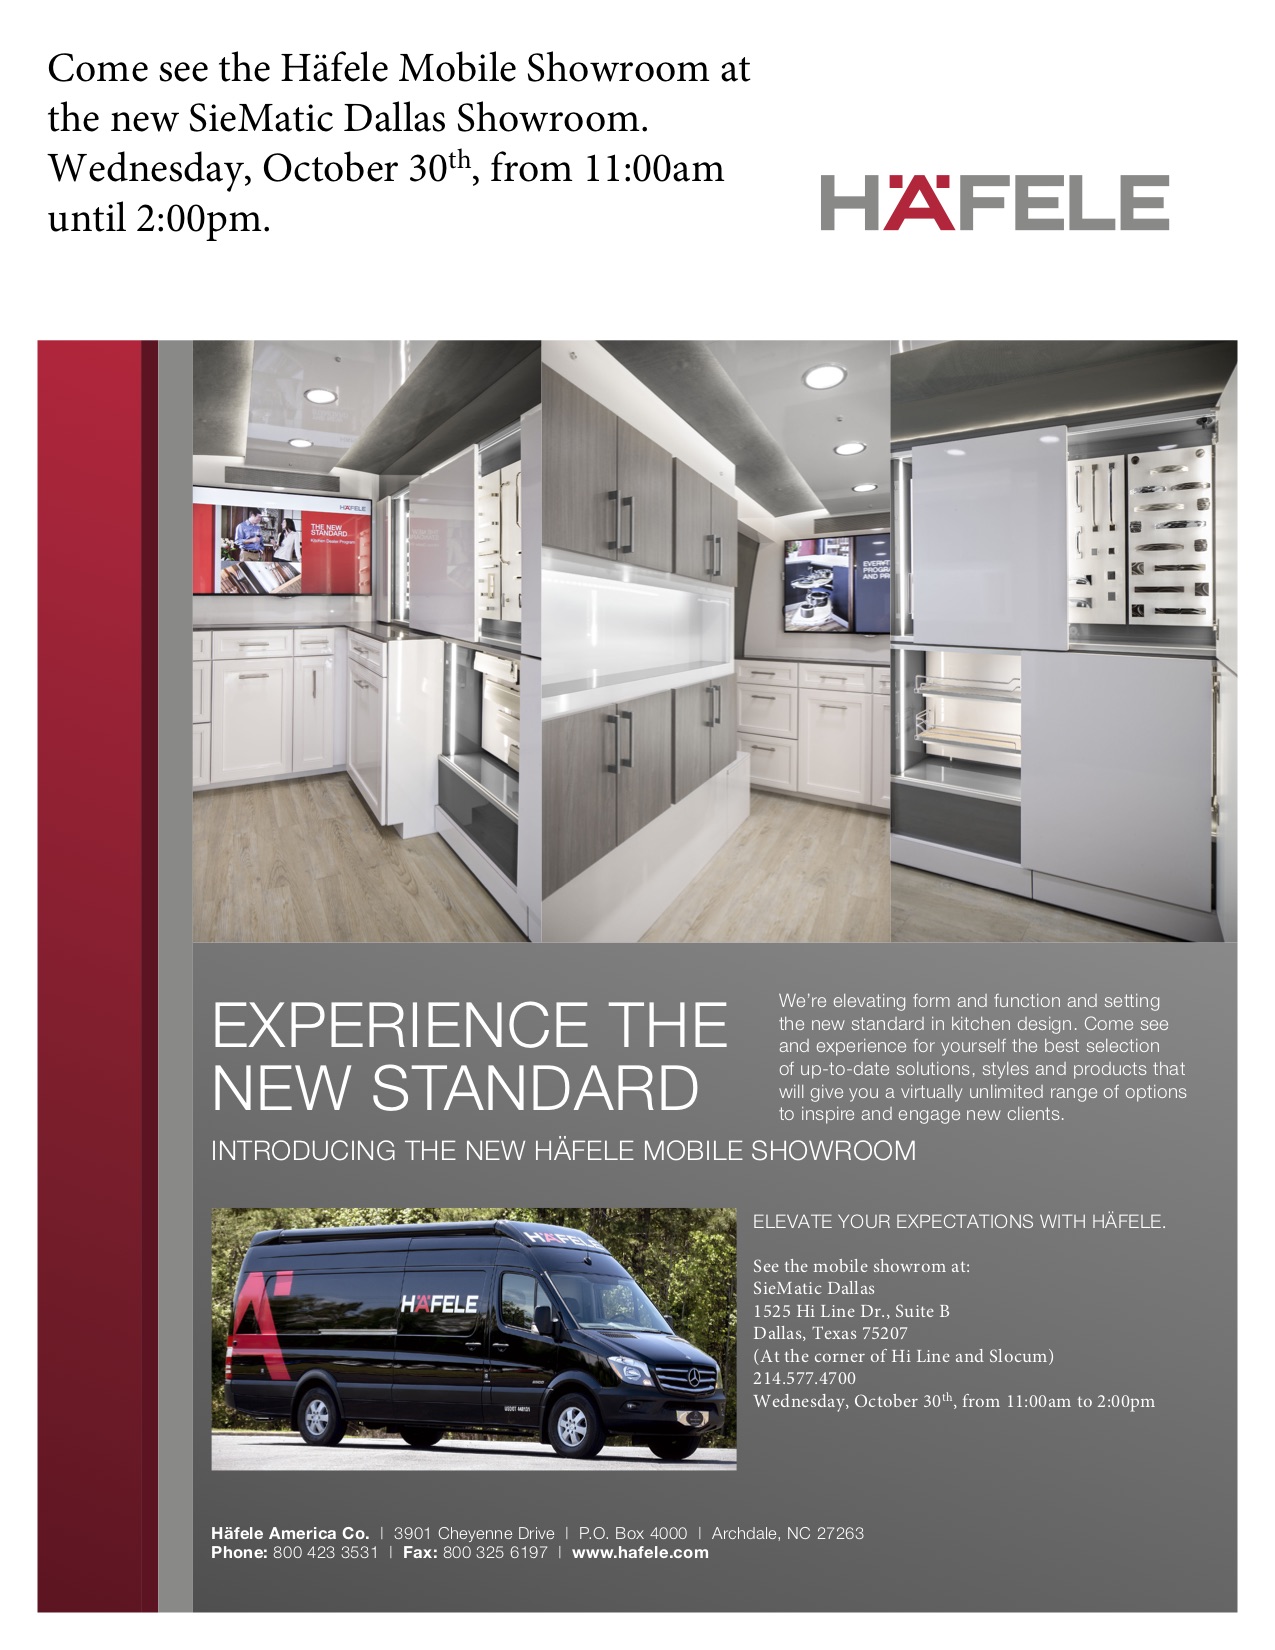 Häfele Mobile Showroom Event At The